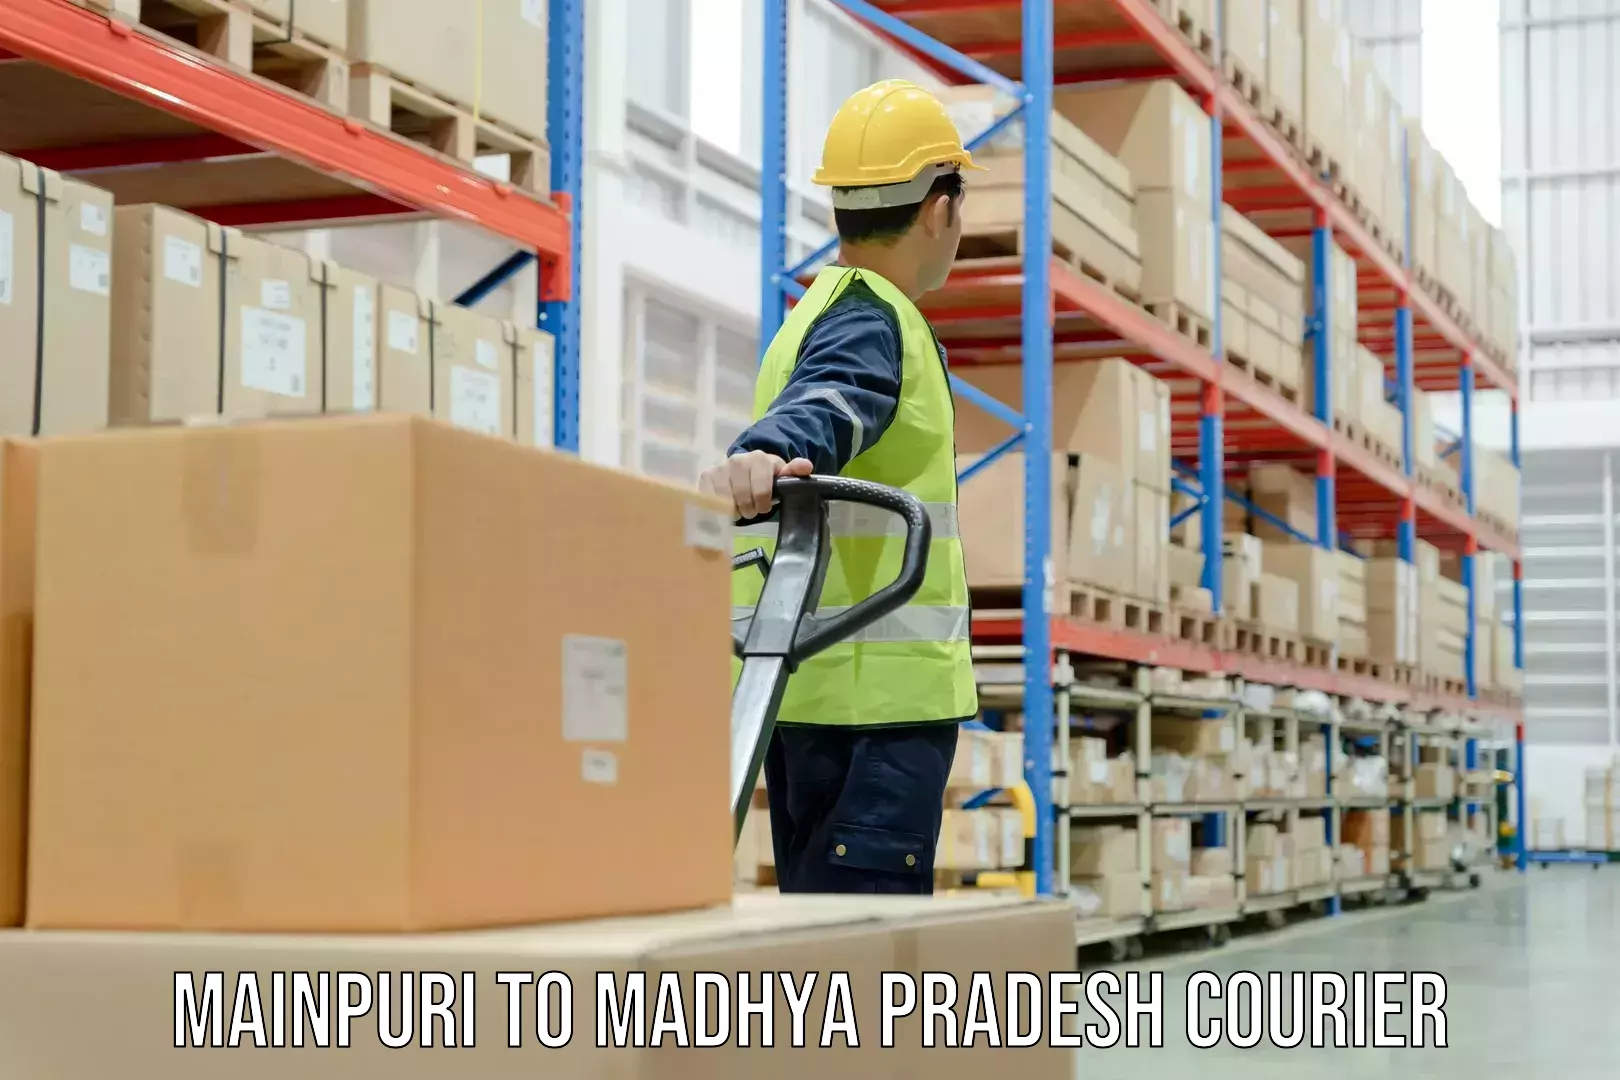 Subscription-based courier Mainpuri to Garoth